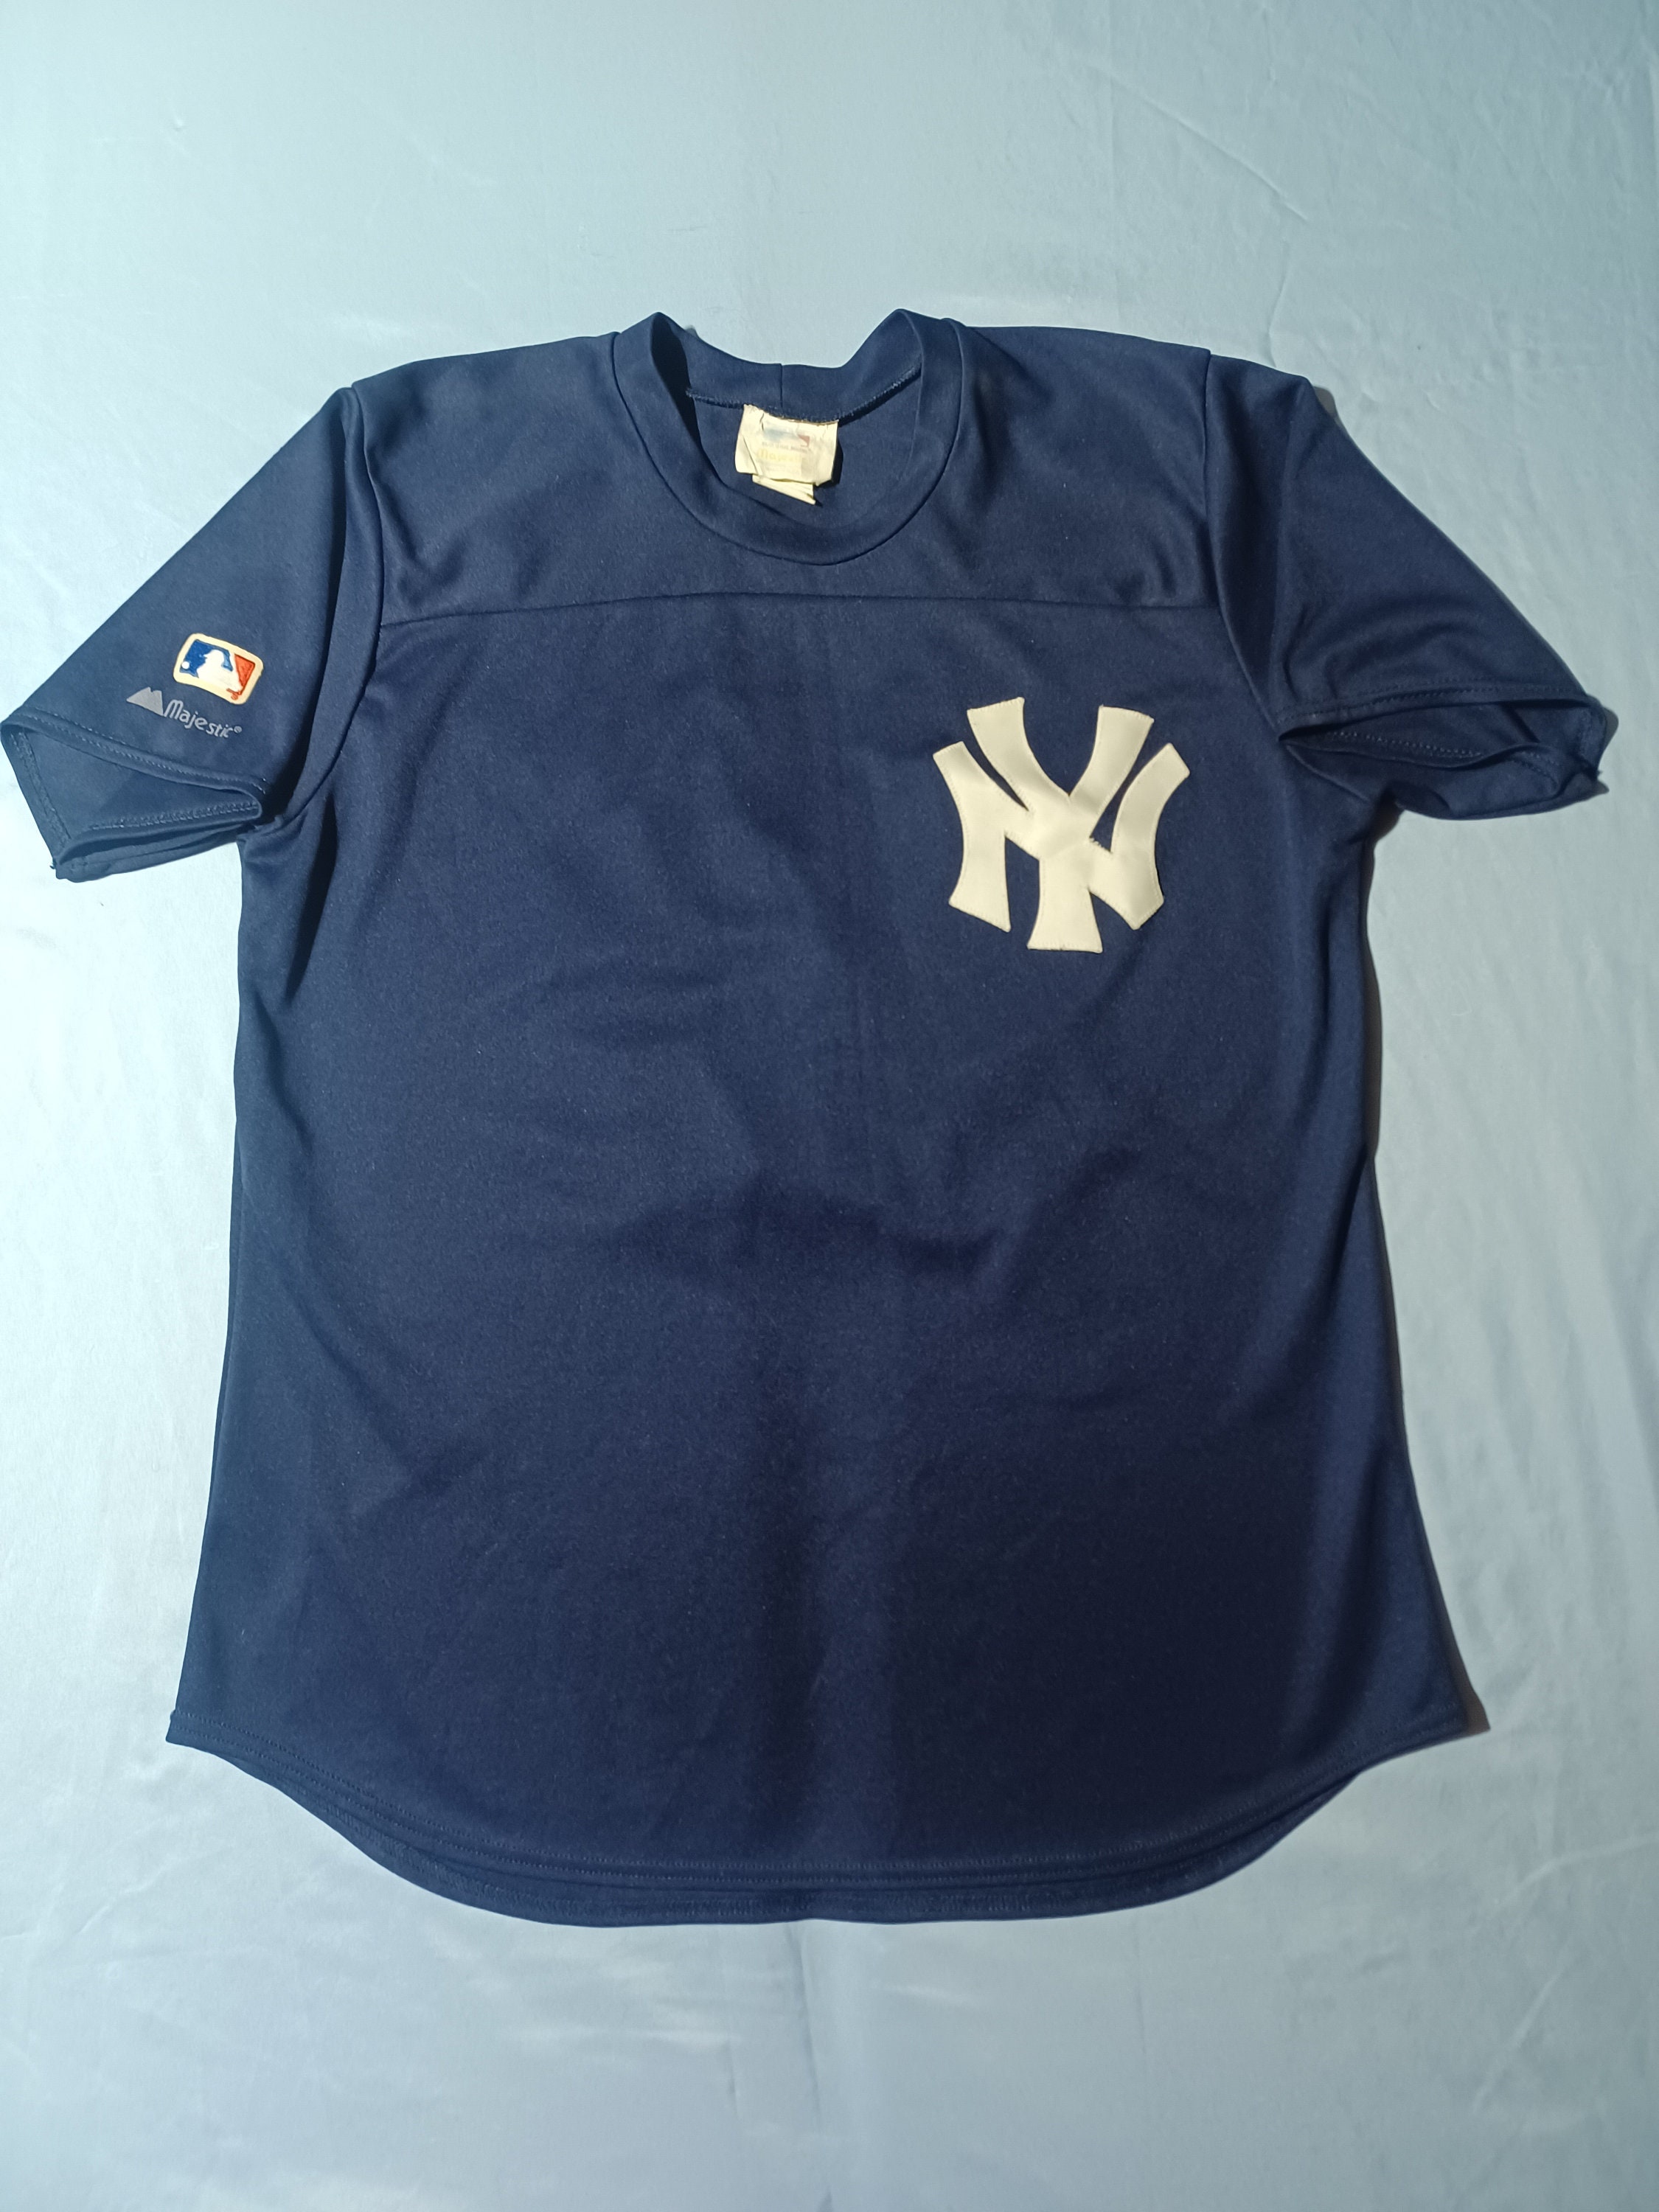 Majestic Playoffs New York Yankees MLB Fan Apparel & Souvenirs for sale